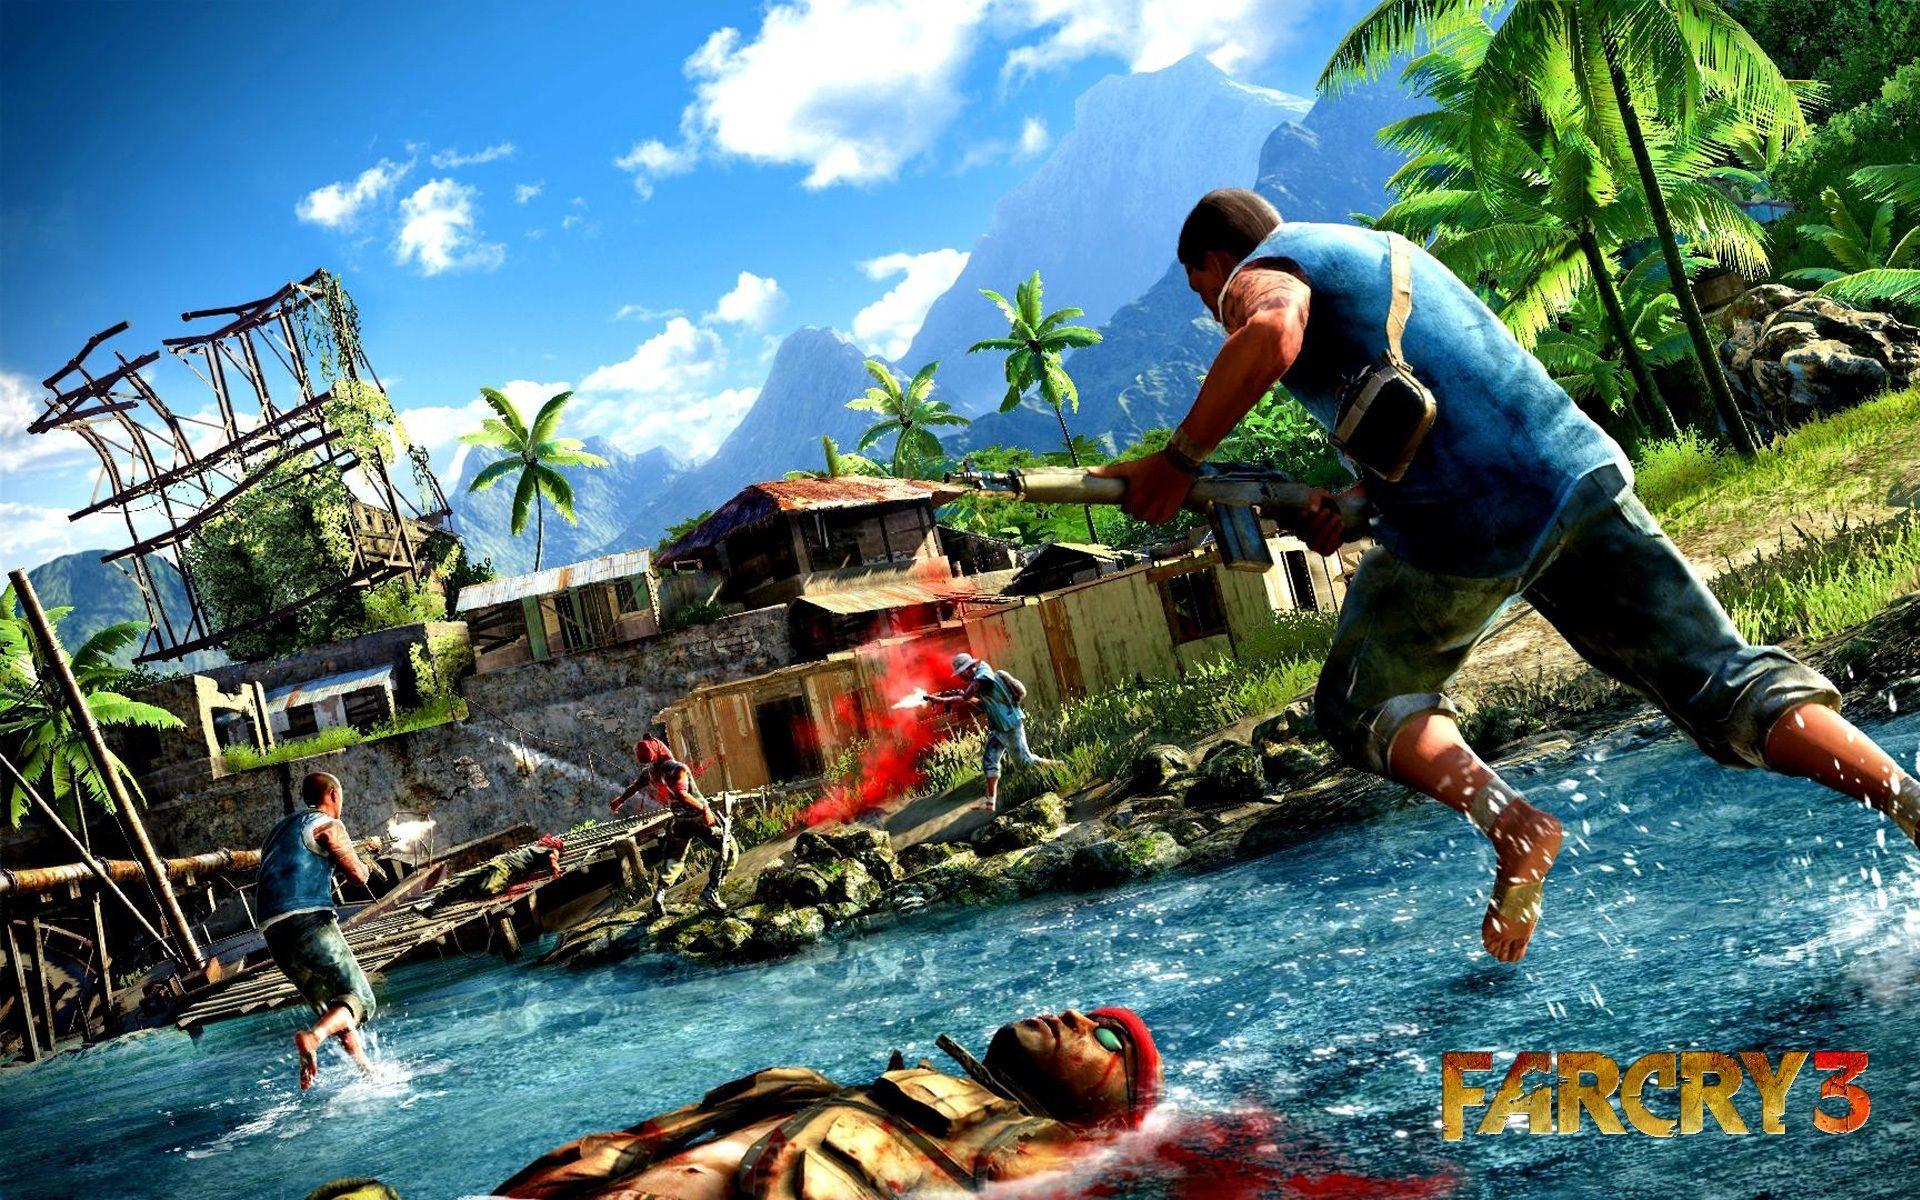 Amazing Background Image. Far Cry 3 Super HD Wallpaper